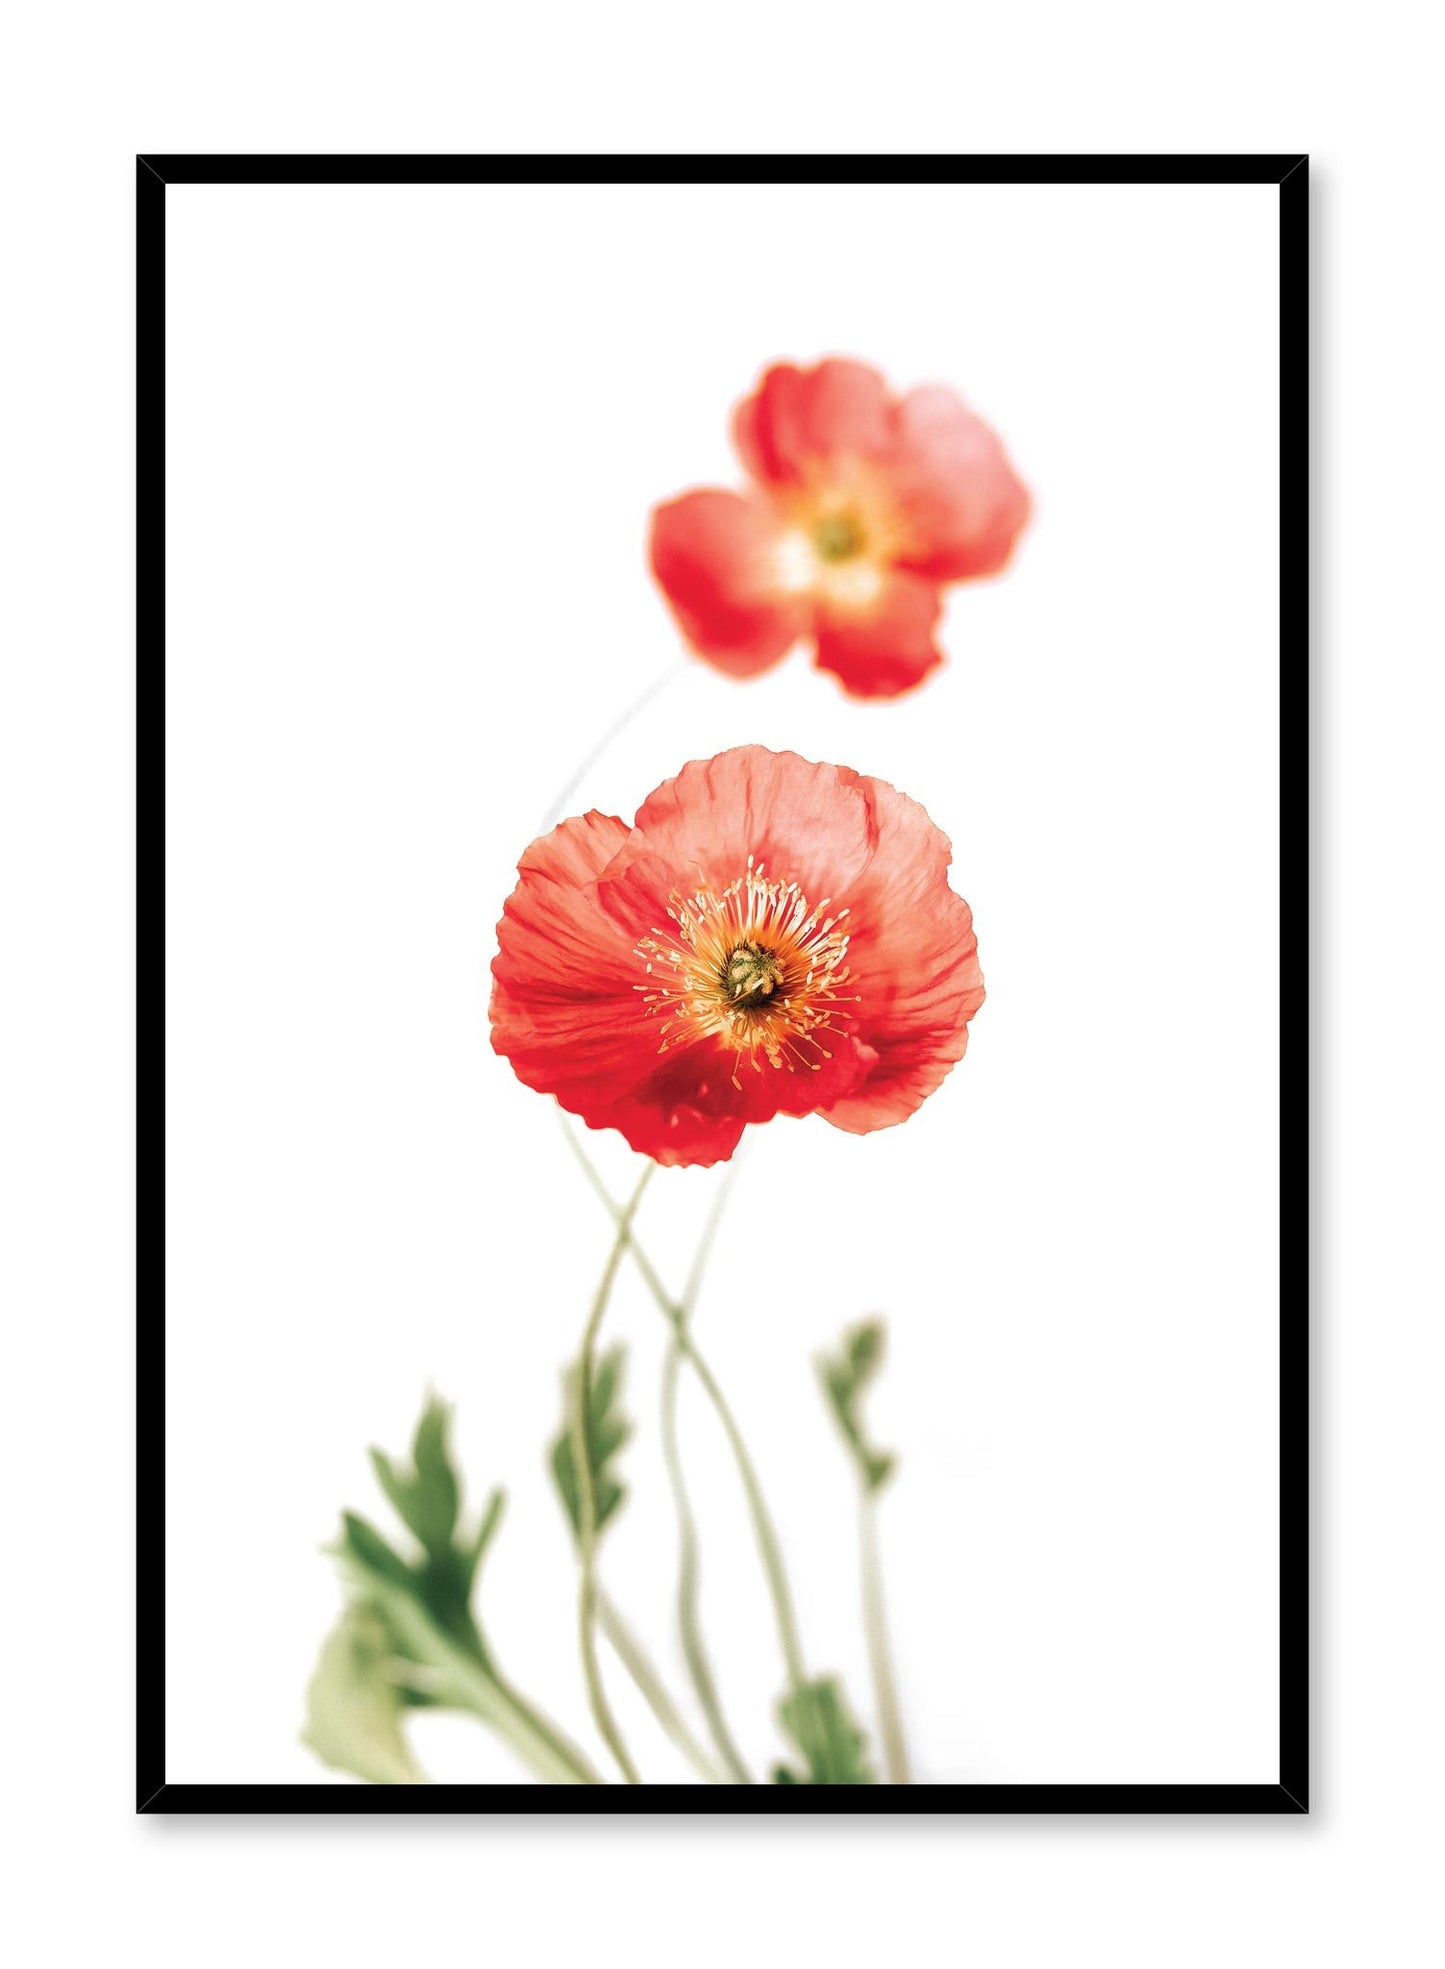 Minimalistic wall poster by Opposite Wall with Poppies floral photography